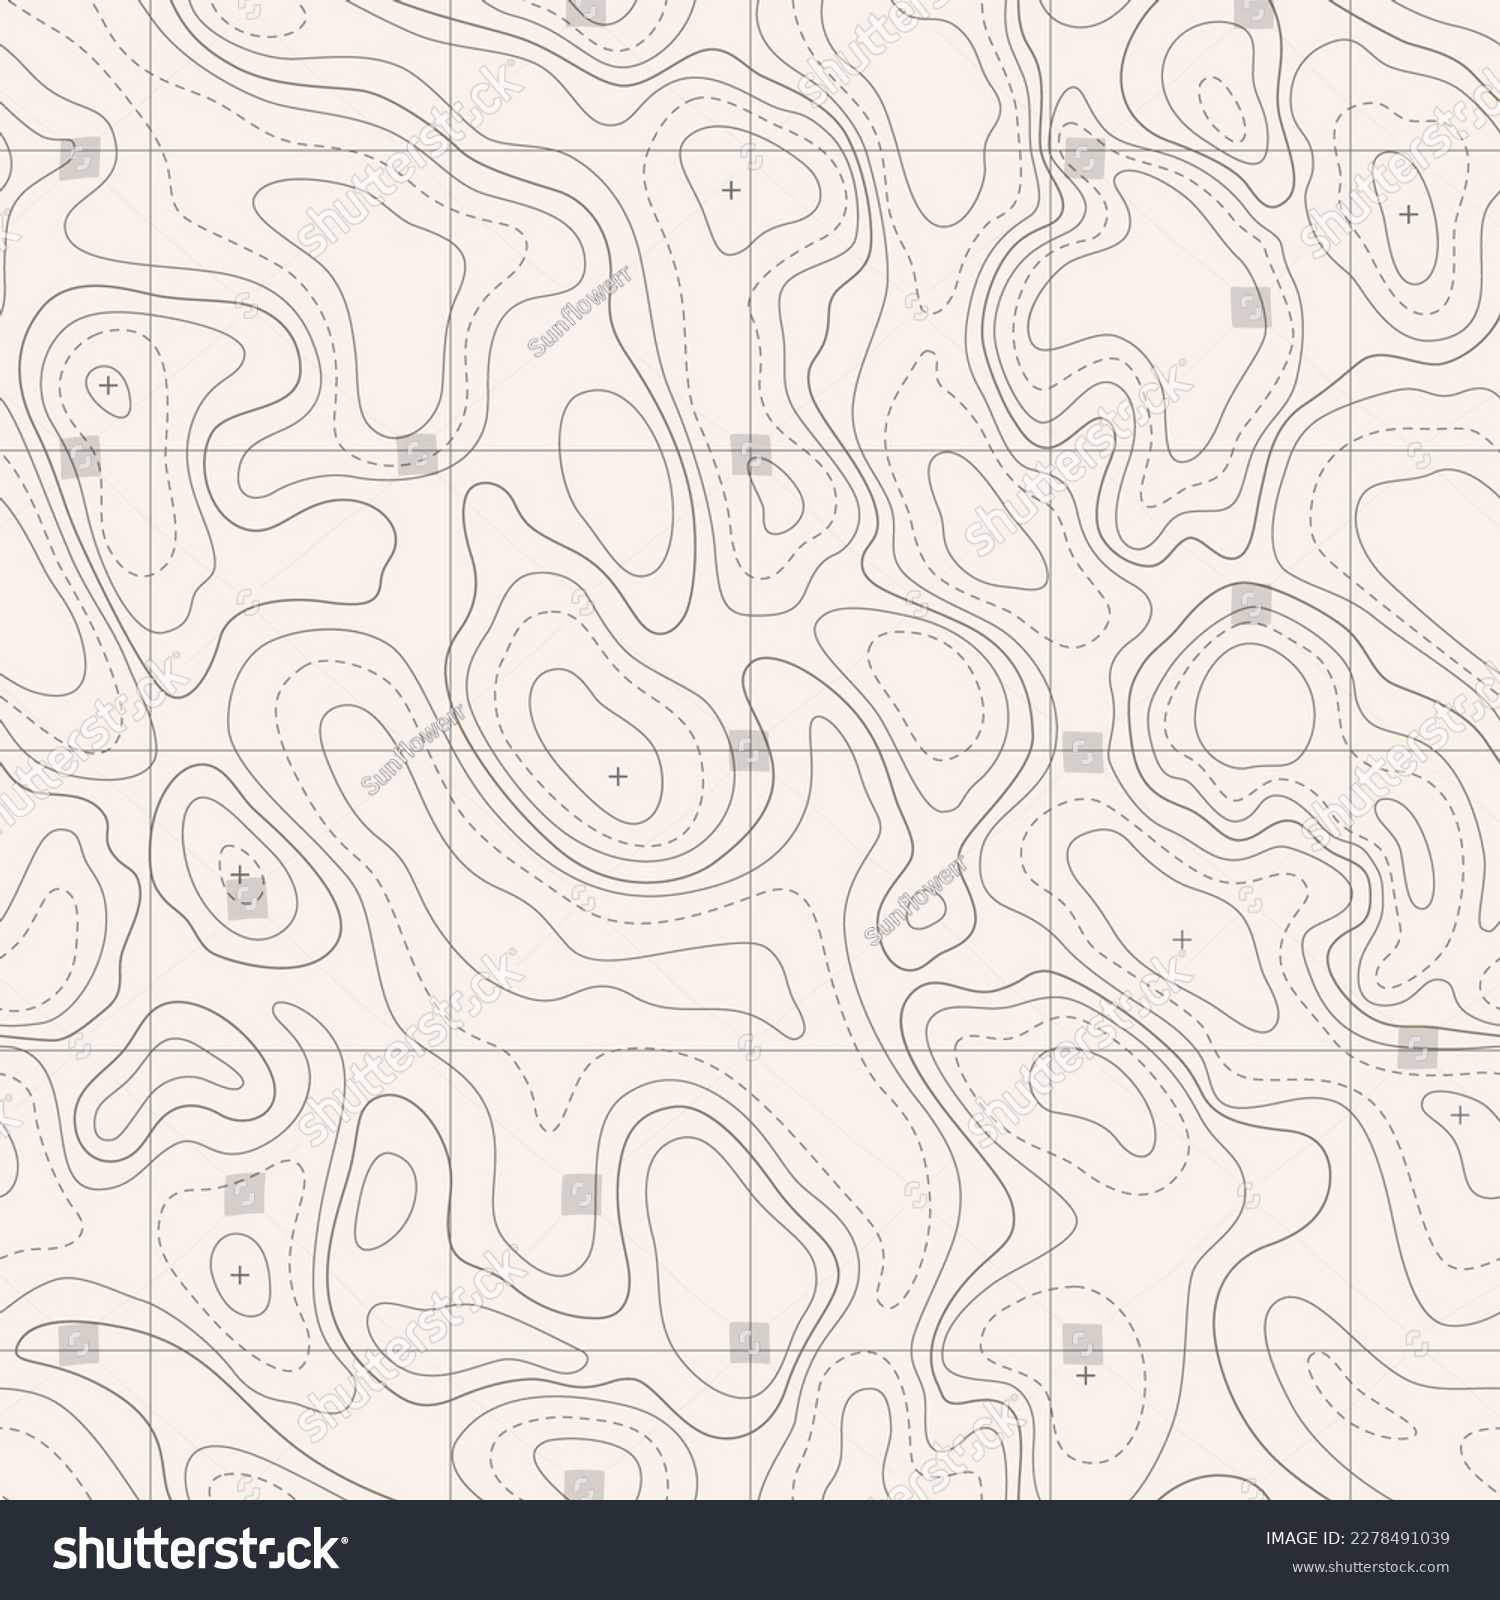 Topographic map seamless pattern background, with wavy lines. Topography map contour with abstract shapes and geographic grid vector illustration #2278491039